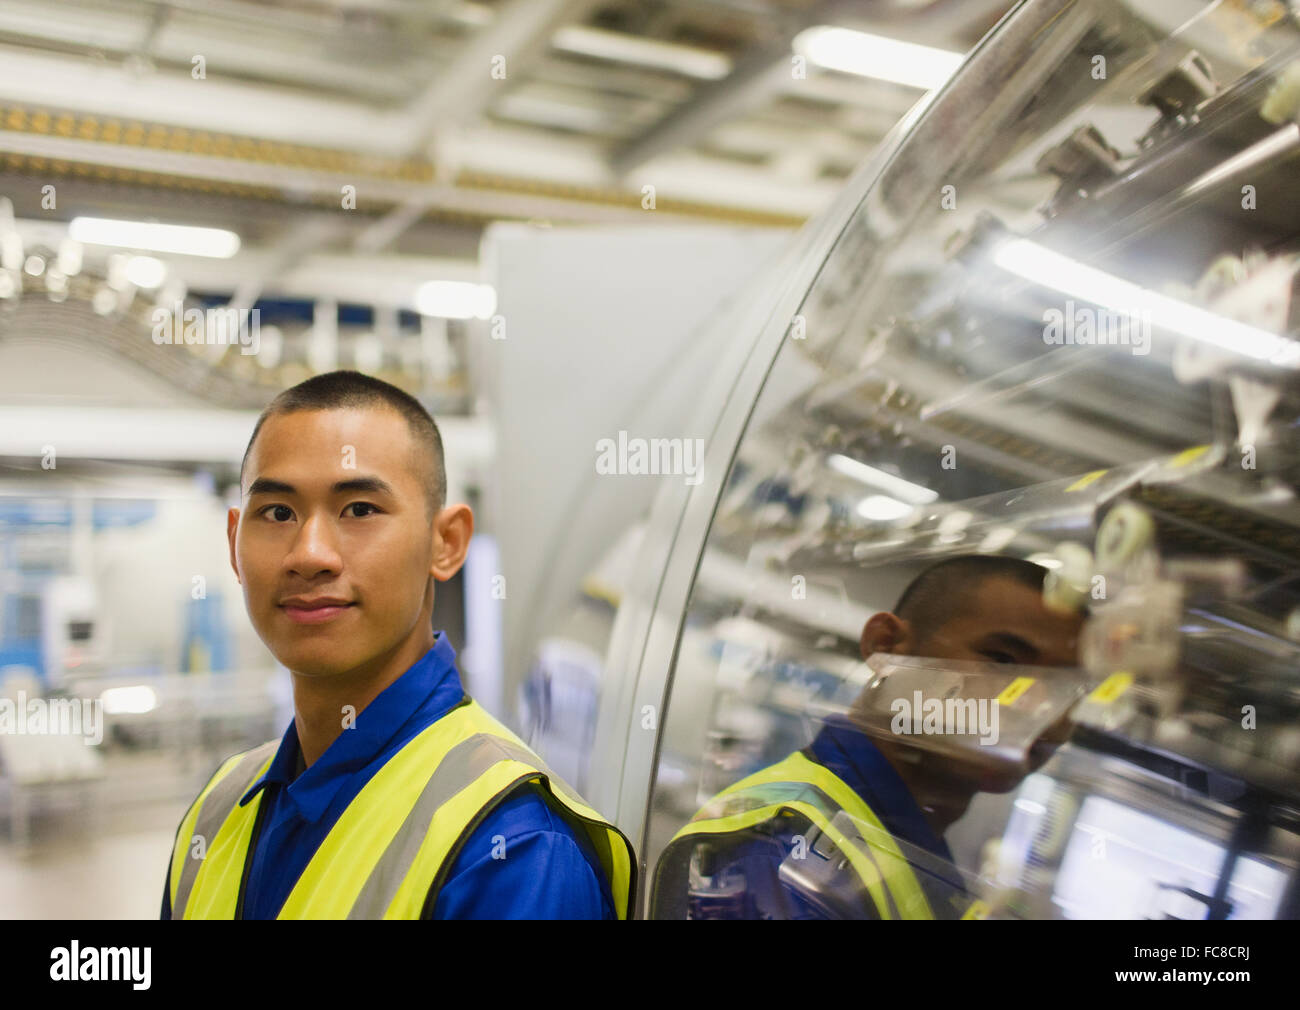 Portrait confident worker leaning on machinery in factory Stock Photo